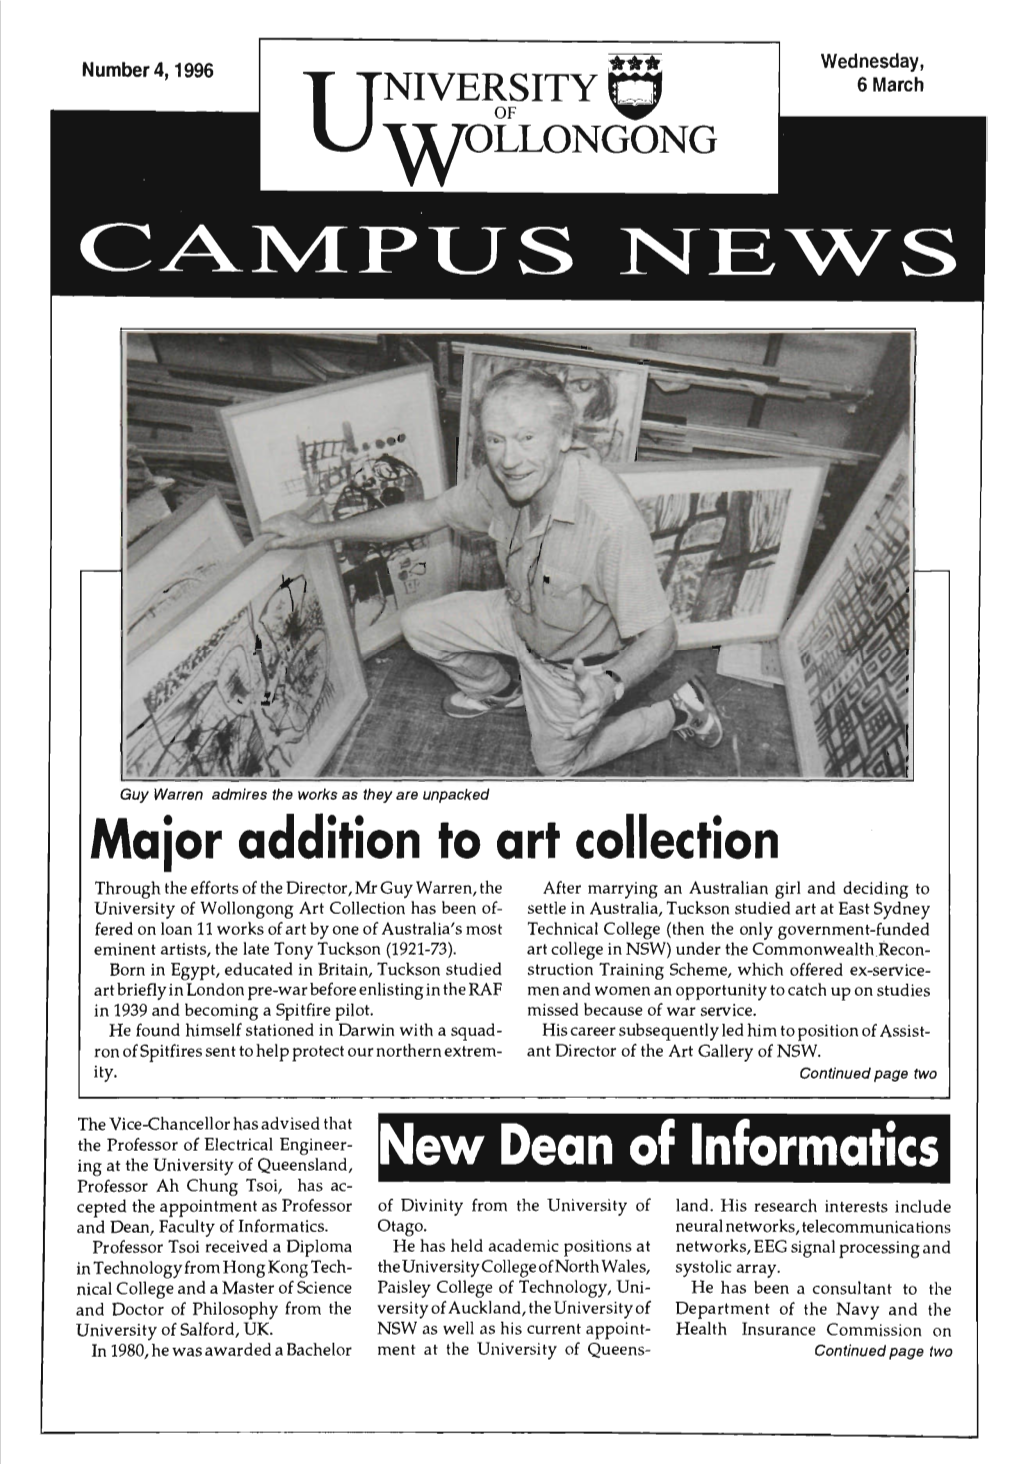 University of Wollongong Campus News 6 March 1996